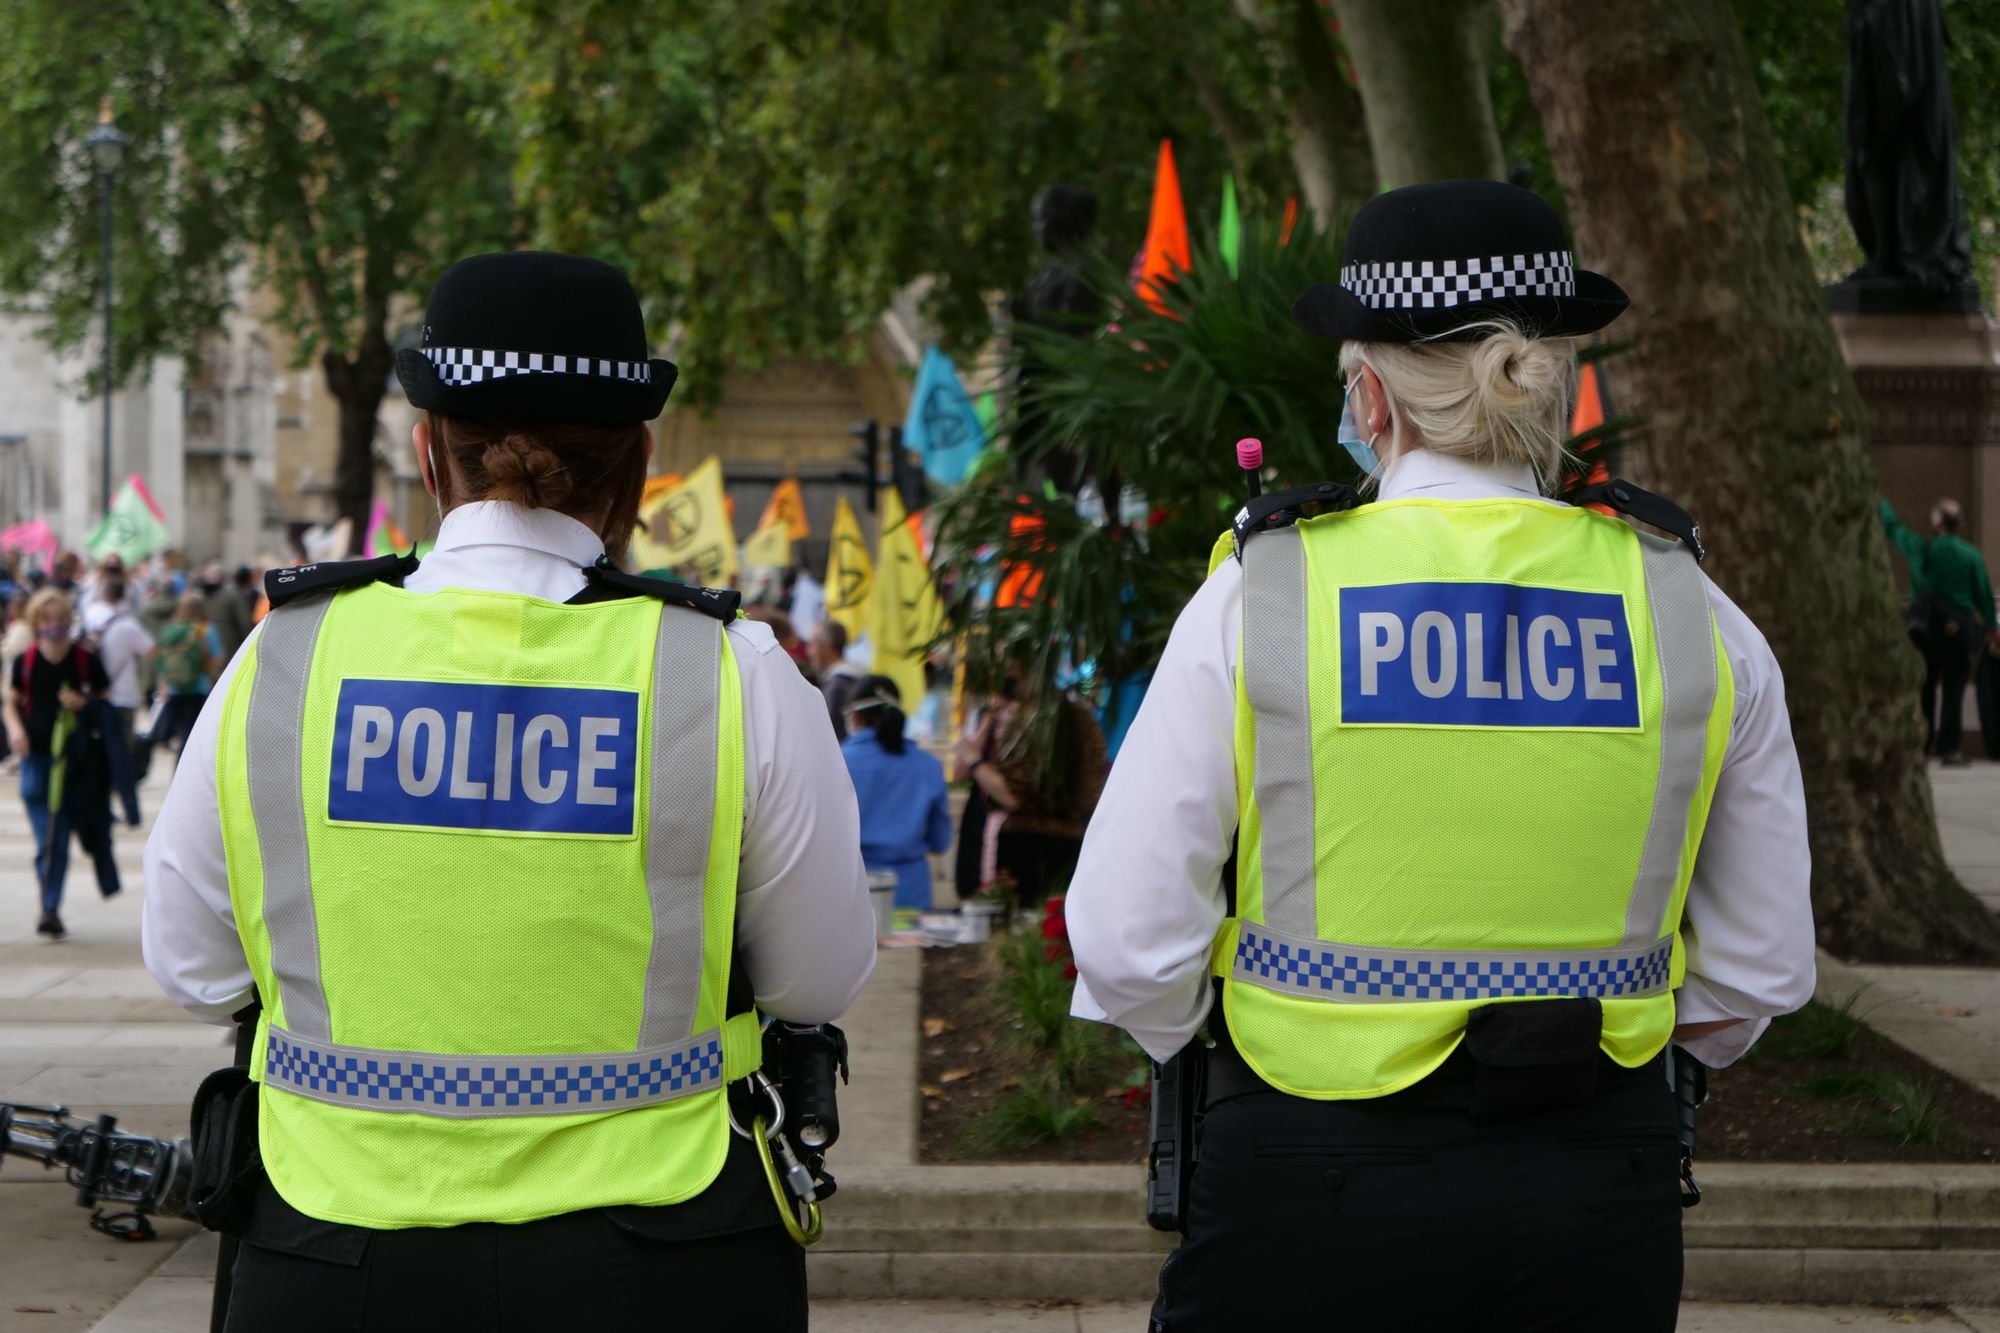 Why are police moving away from criminalising people who use drugs?